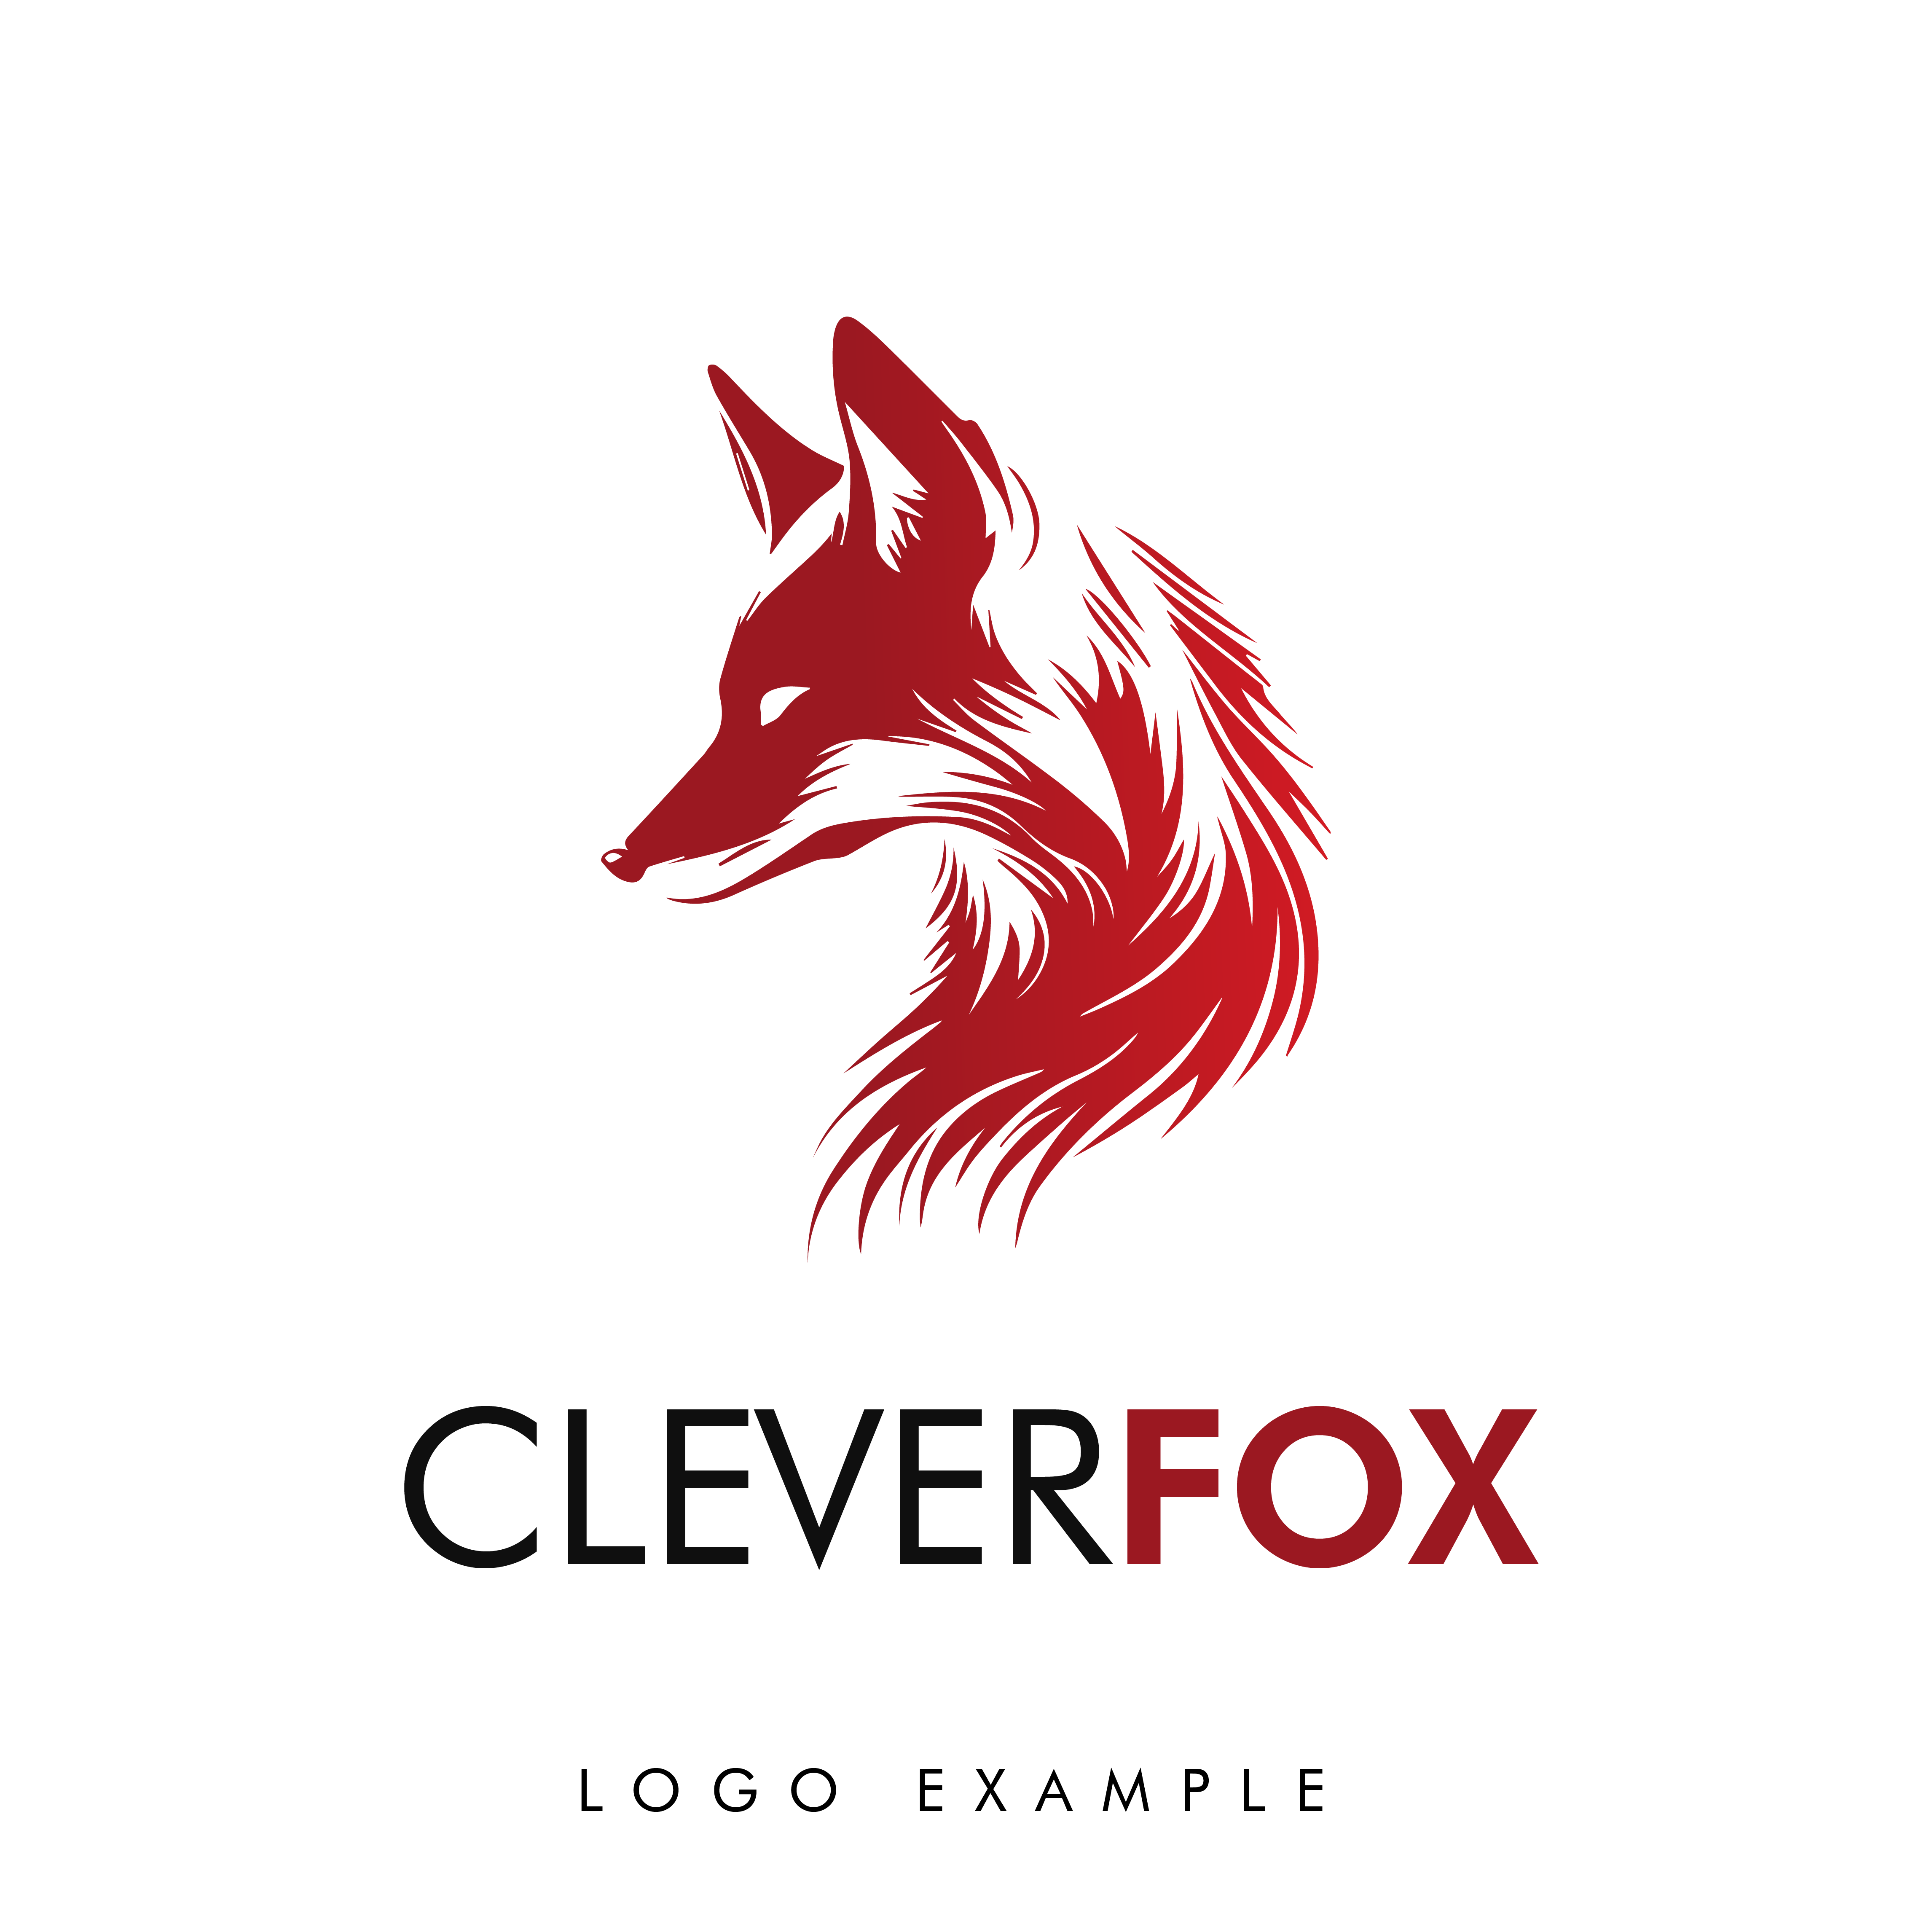 Red fox logo on a white background.